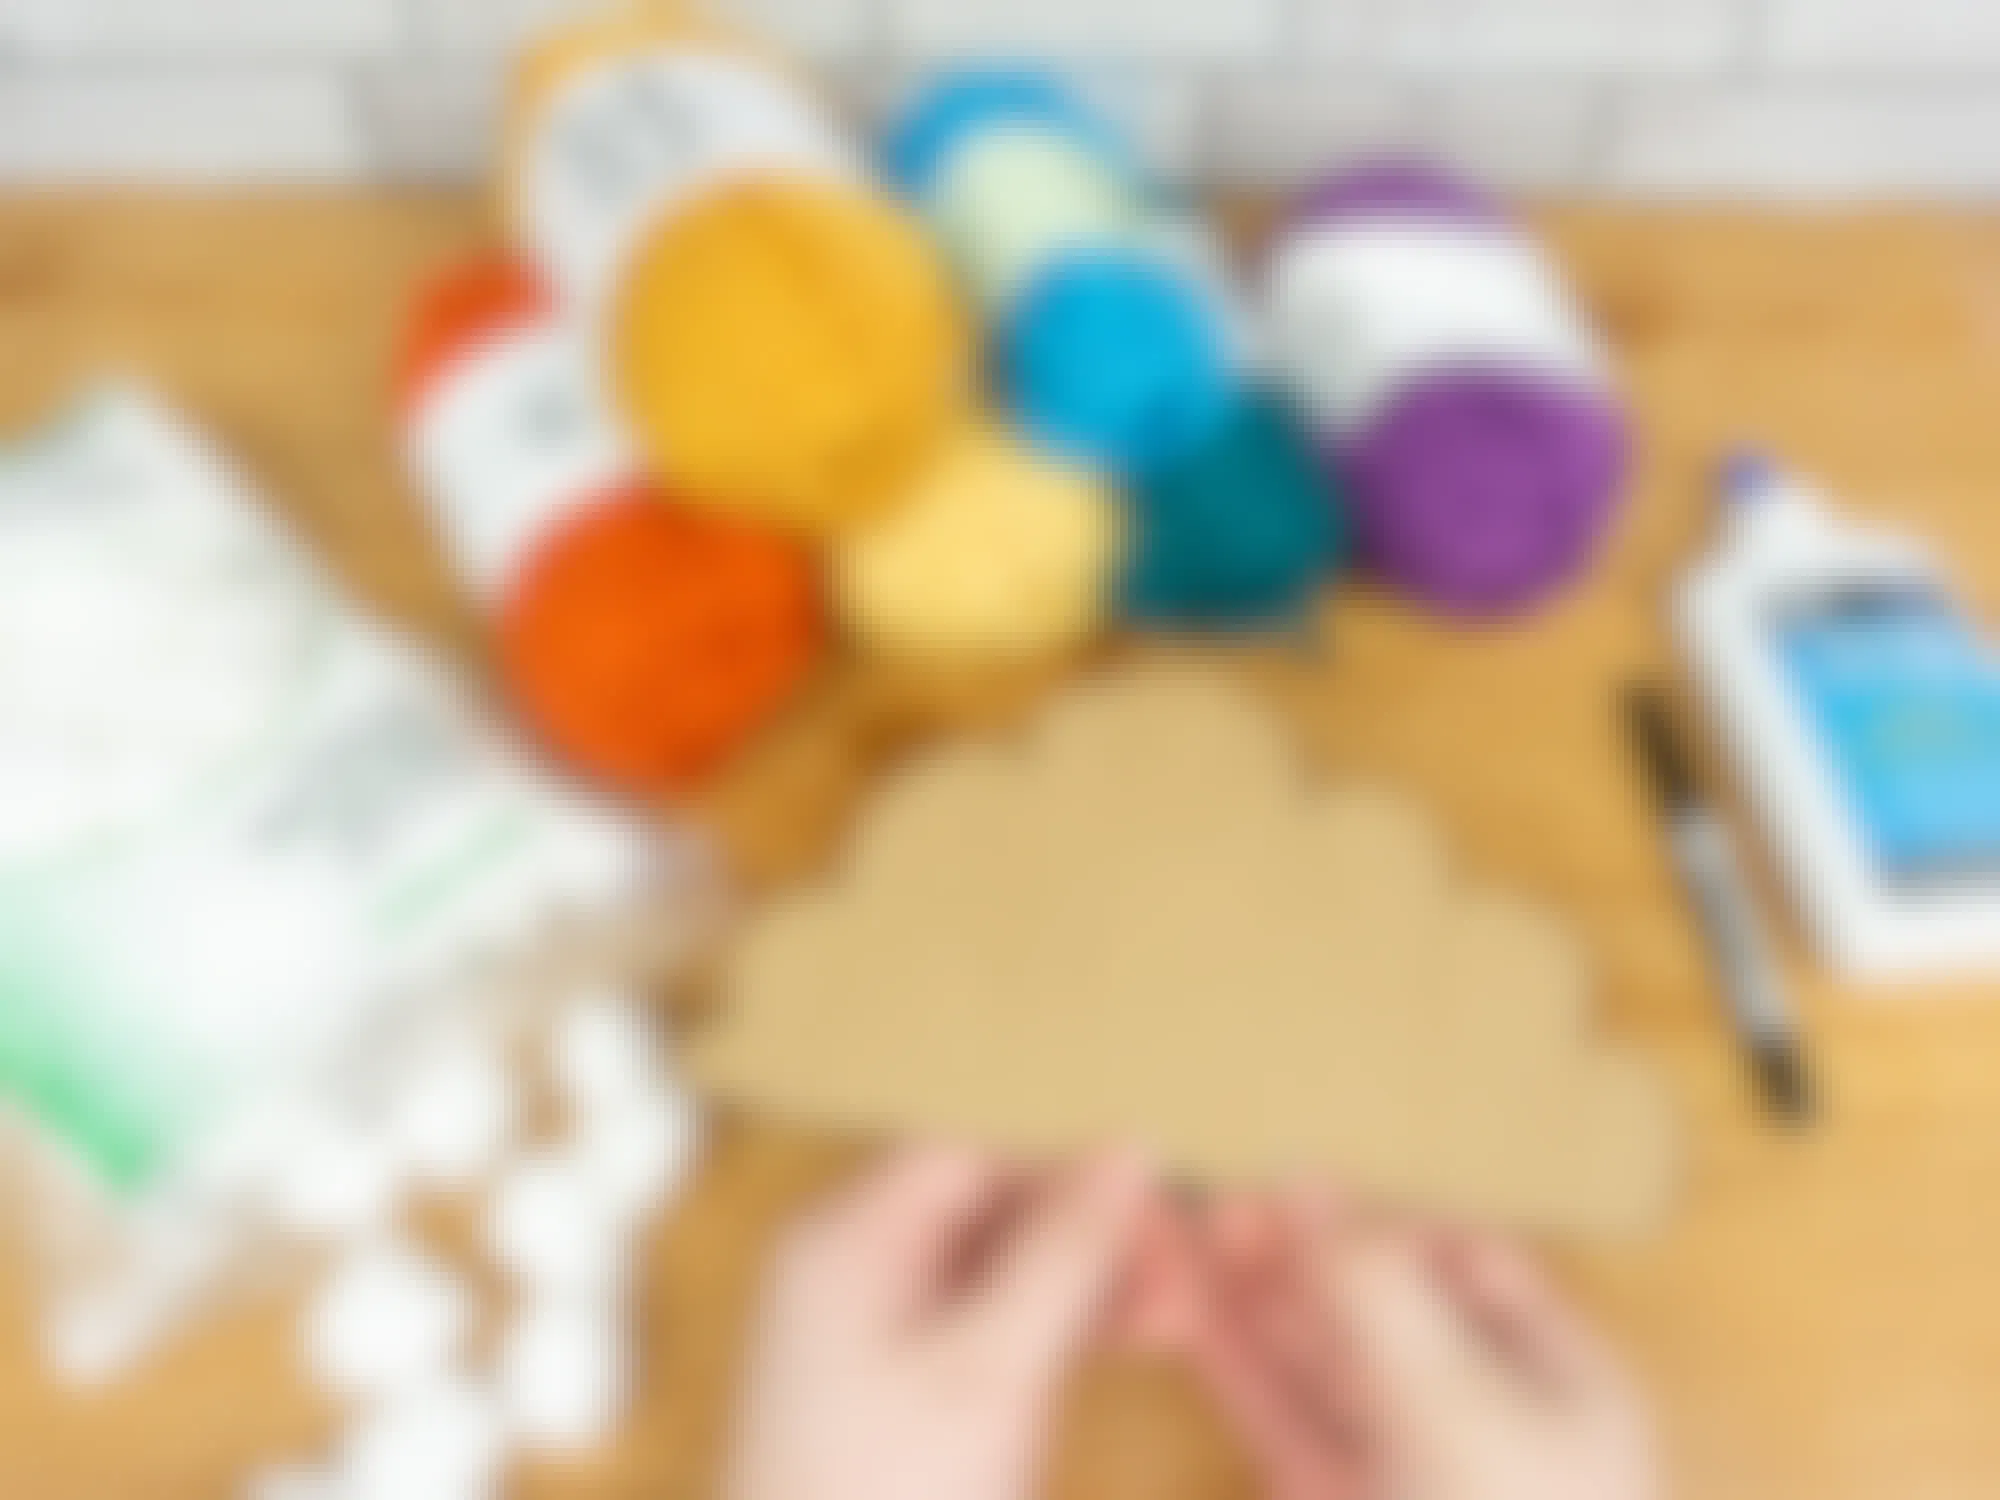 Someone holding a piece of cardboard cut out into a cloud shape in front of supplies for a DIY rainbow cloud decoration including different colored yarn, cotton balls, and glue